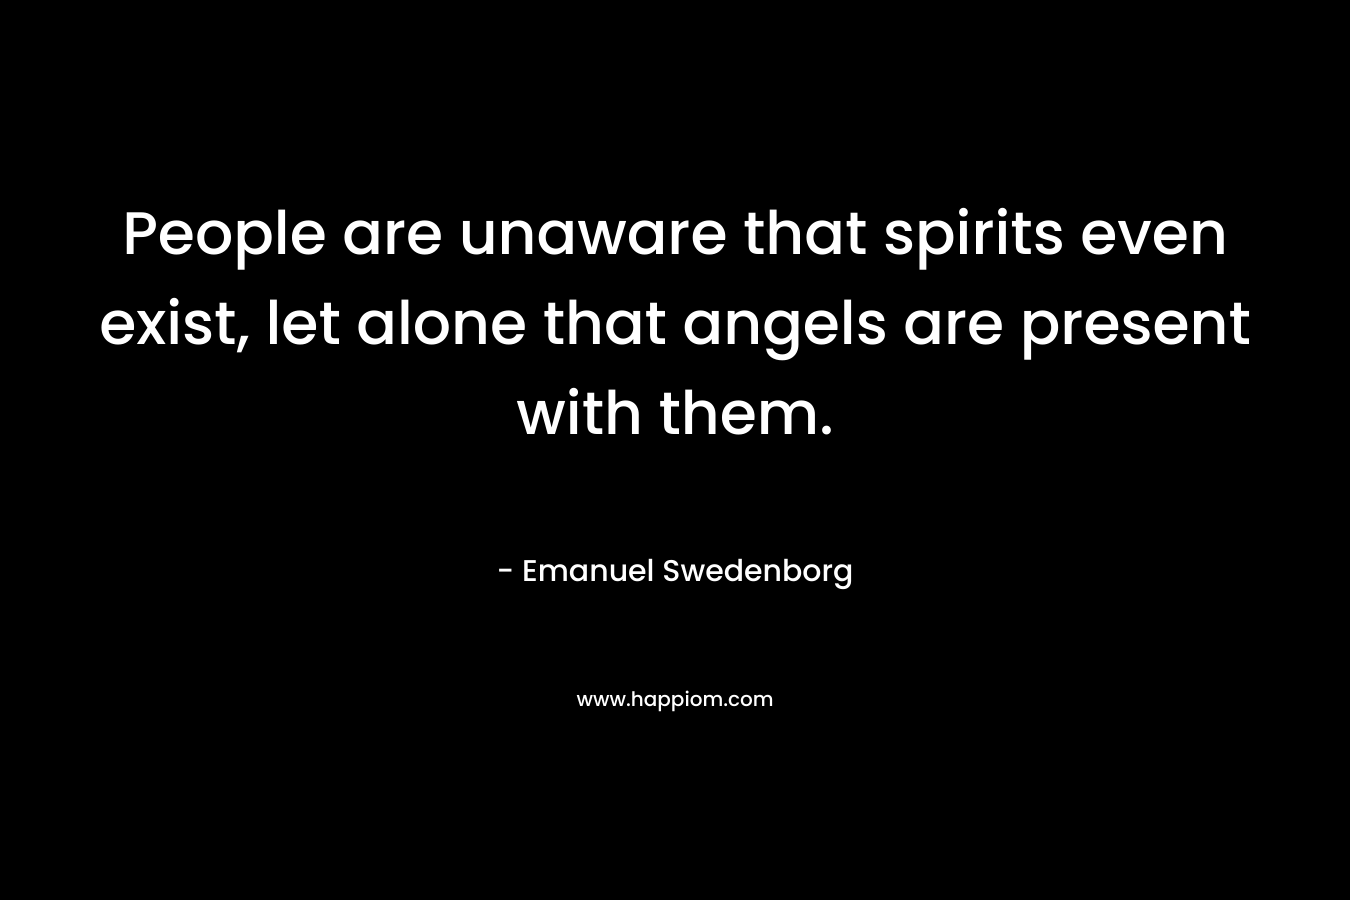 People are unaware that spirits even exist, let alone that angels are present with them.